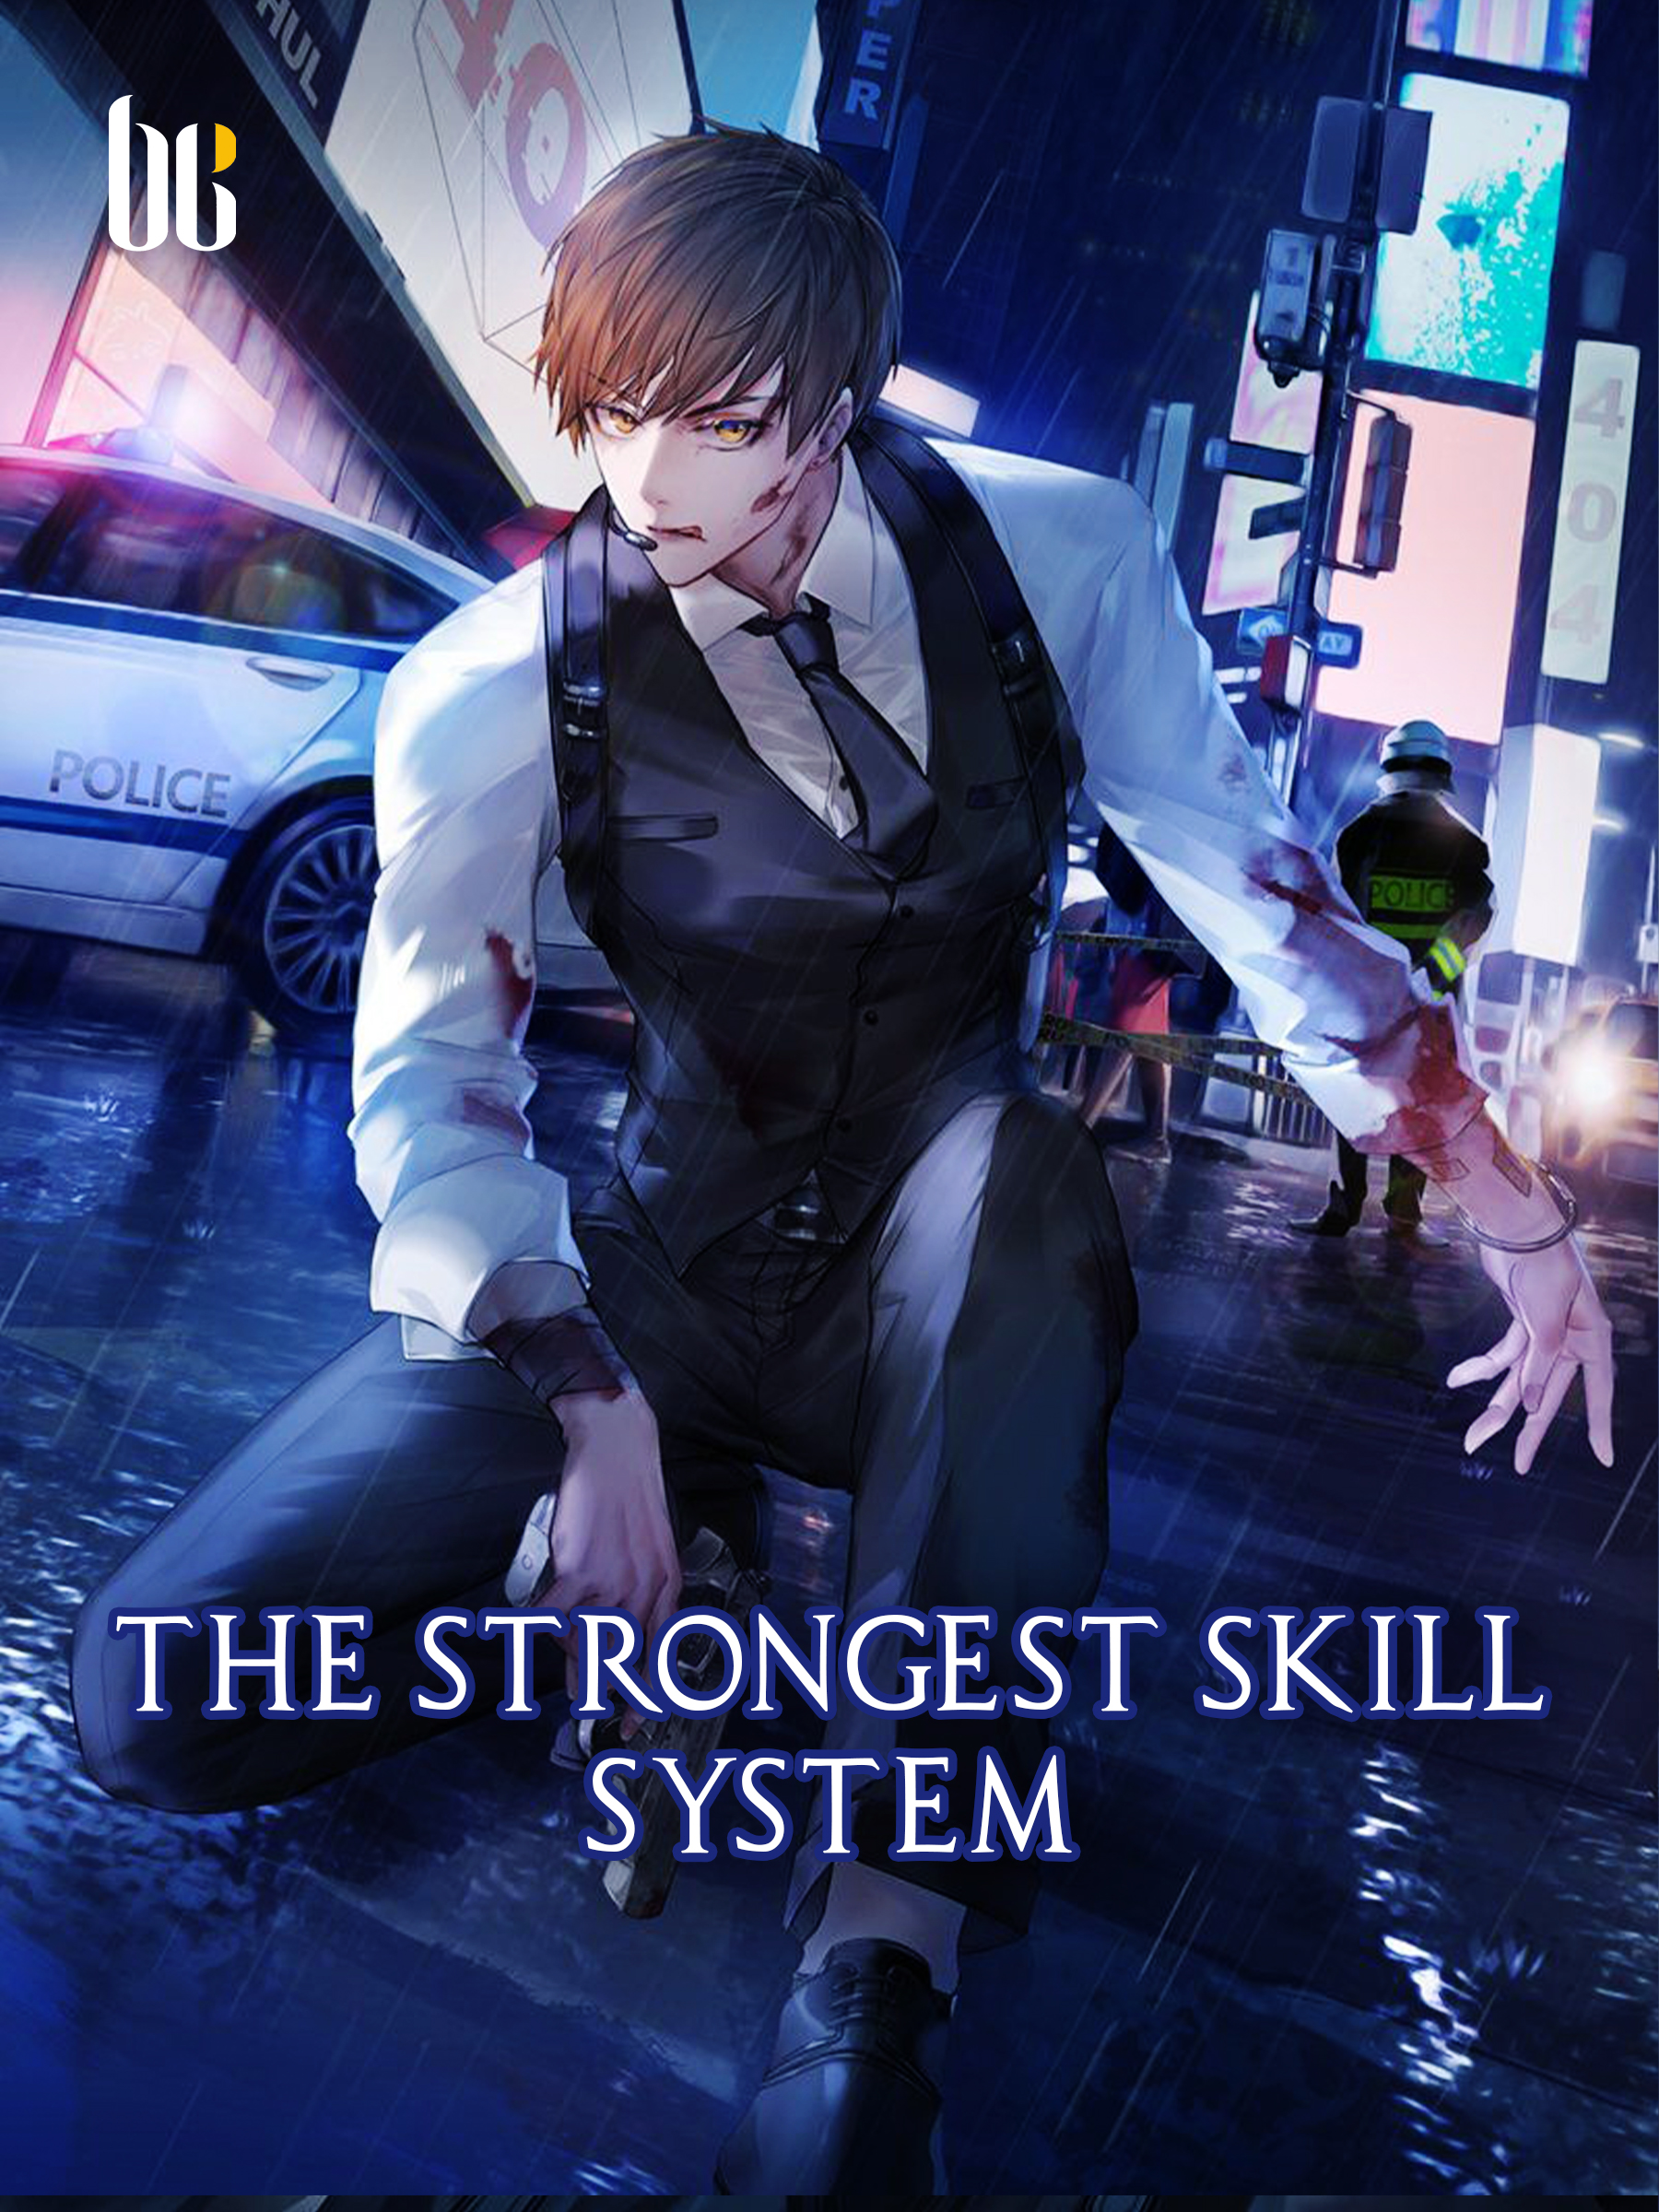 The Strongest Skill System